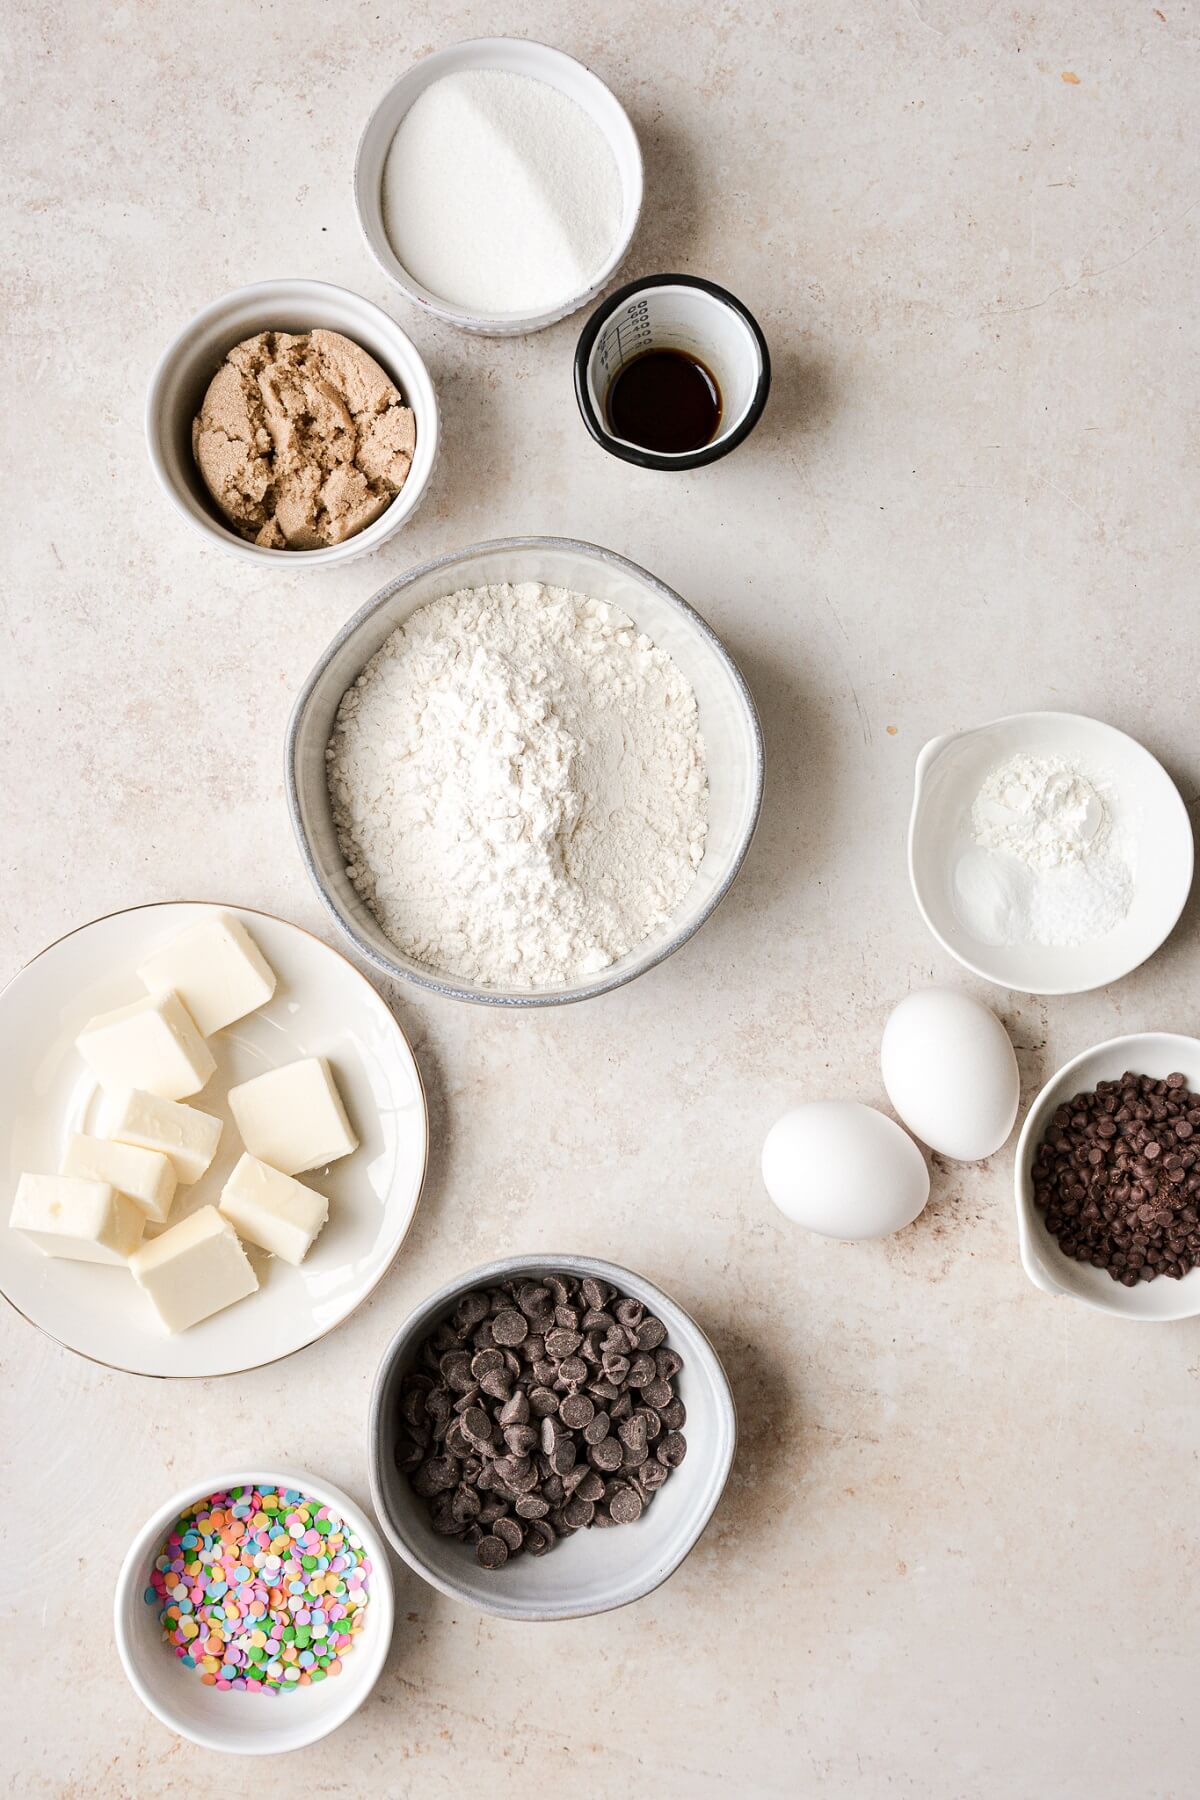 Ingredients for making a big chocolate chip cookie birthday cake.